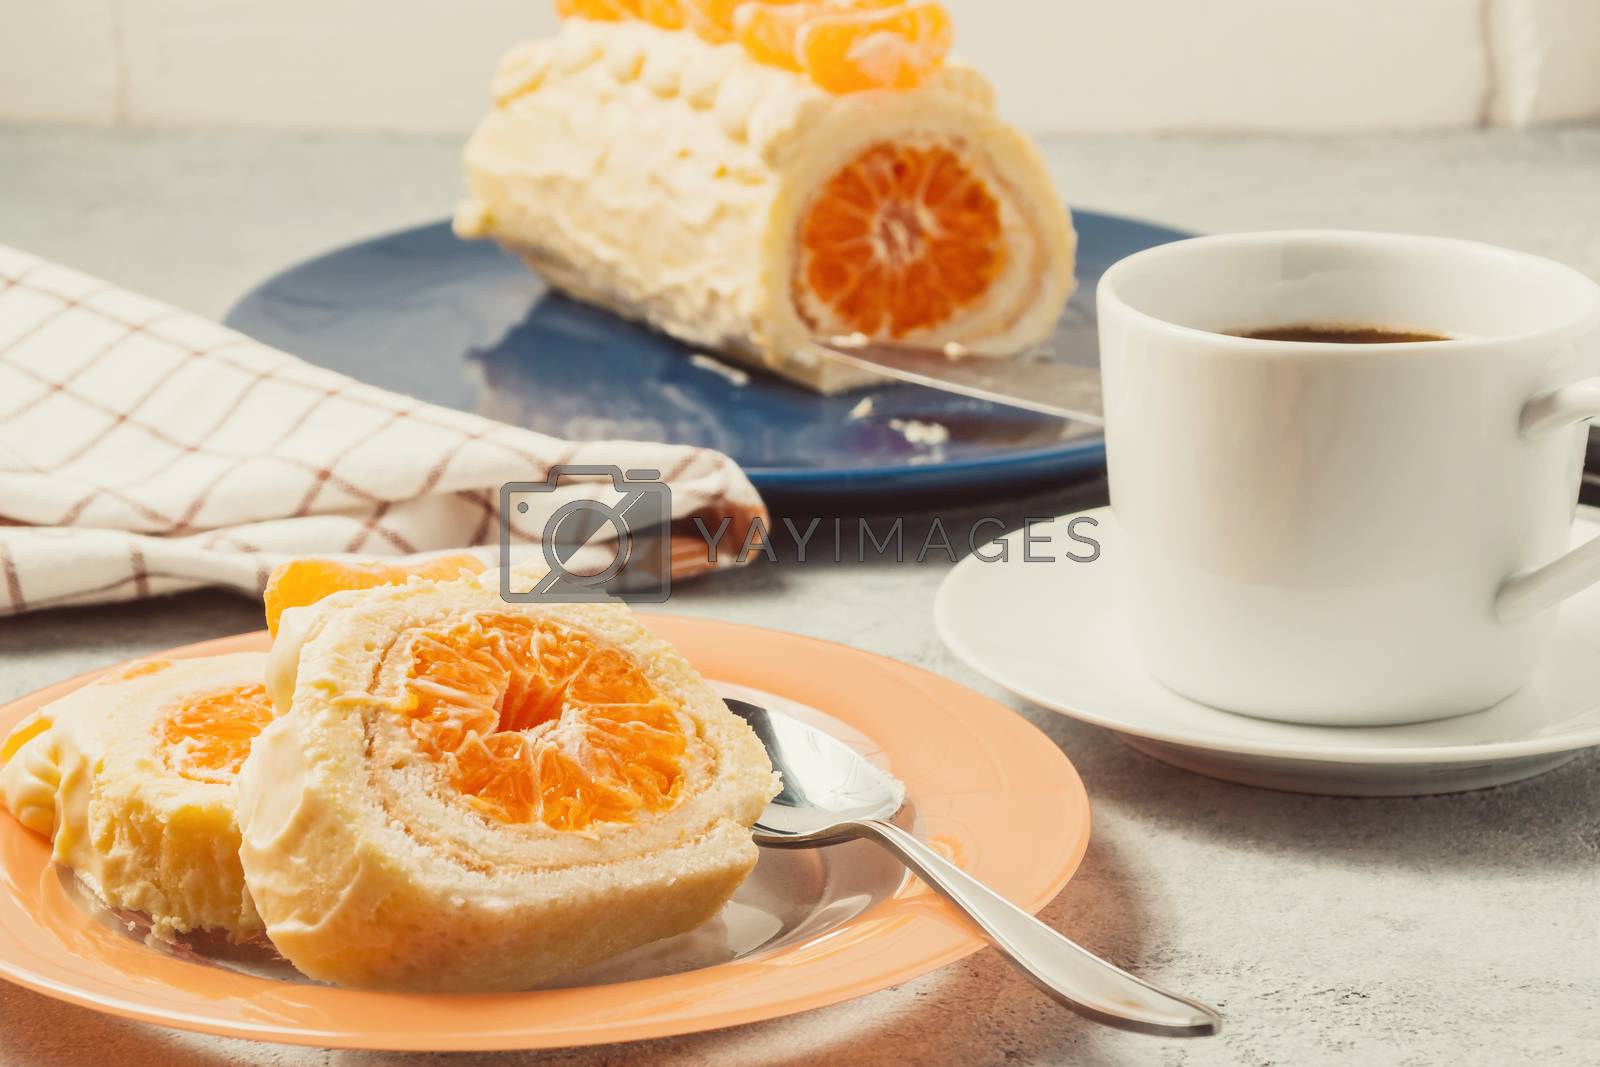 Royalty free image of Sweet roll with whipped cream and tangerine filling and a cup of coffee by galsand